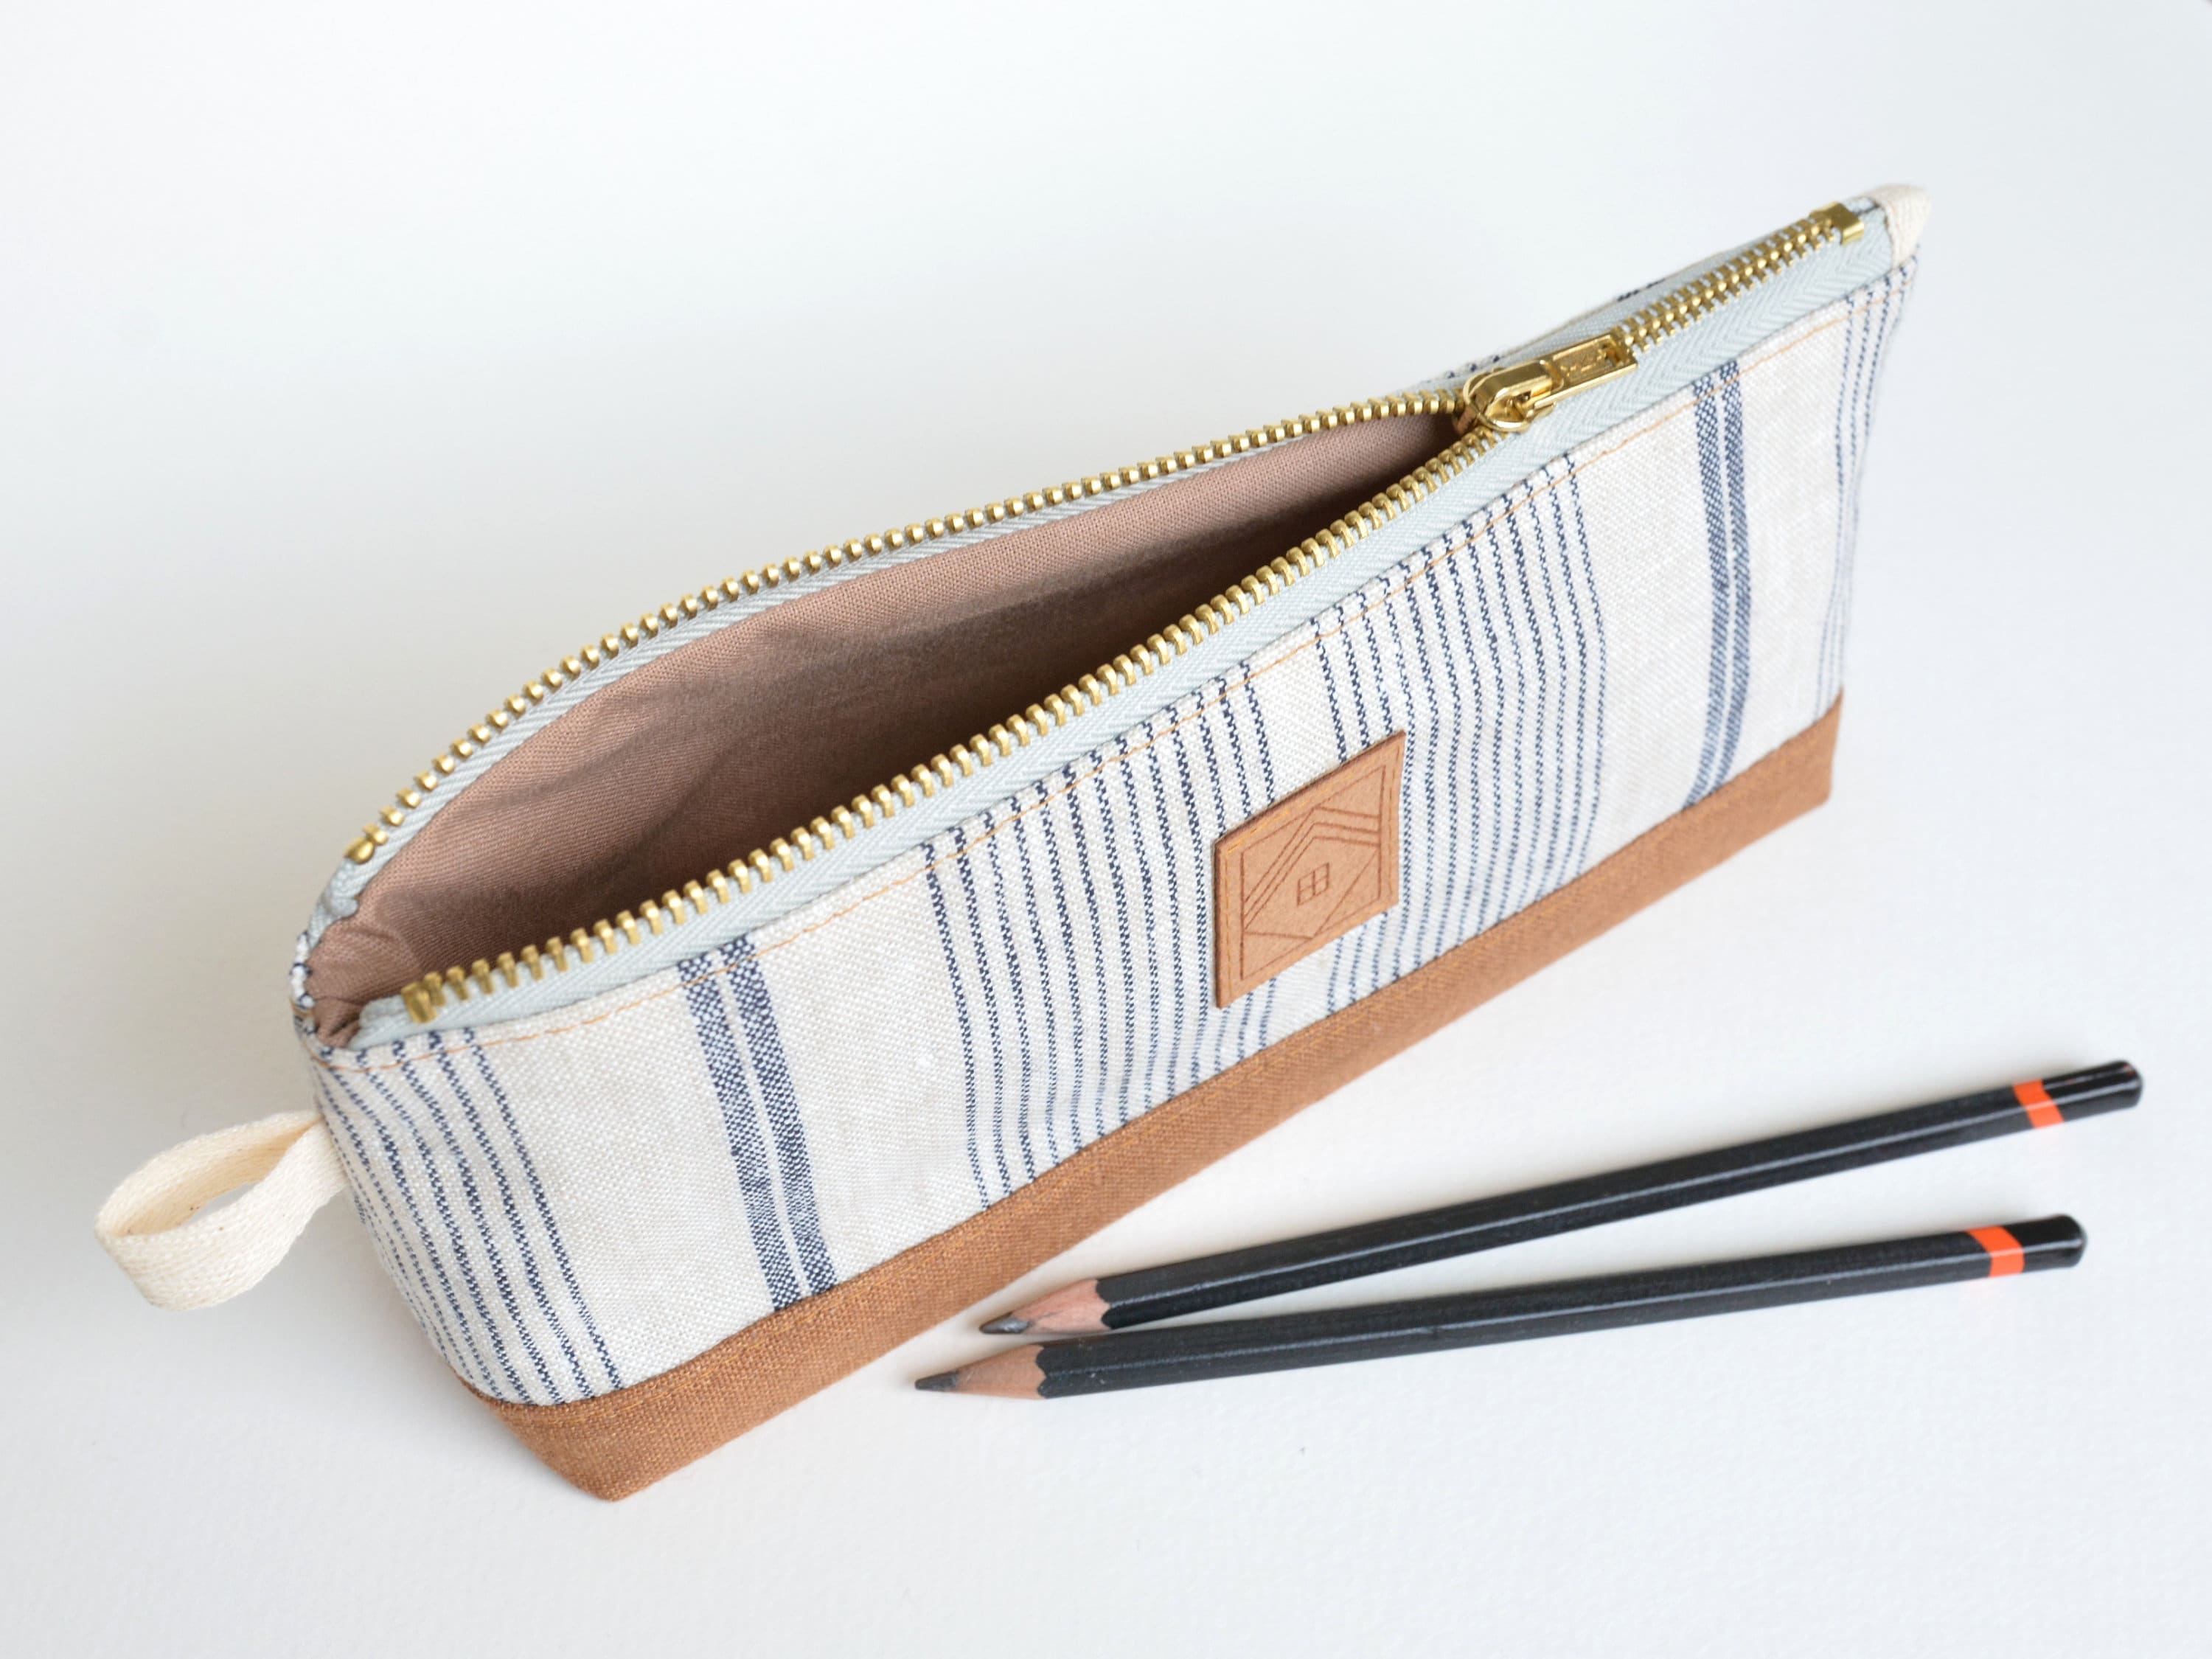 Linen Pencil Case Grey Brown Adult Pencil Holder Gift for Coworker